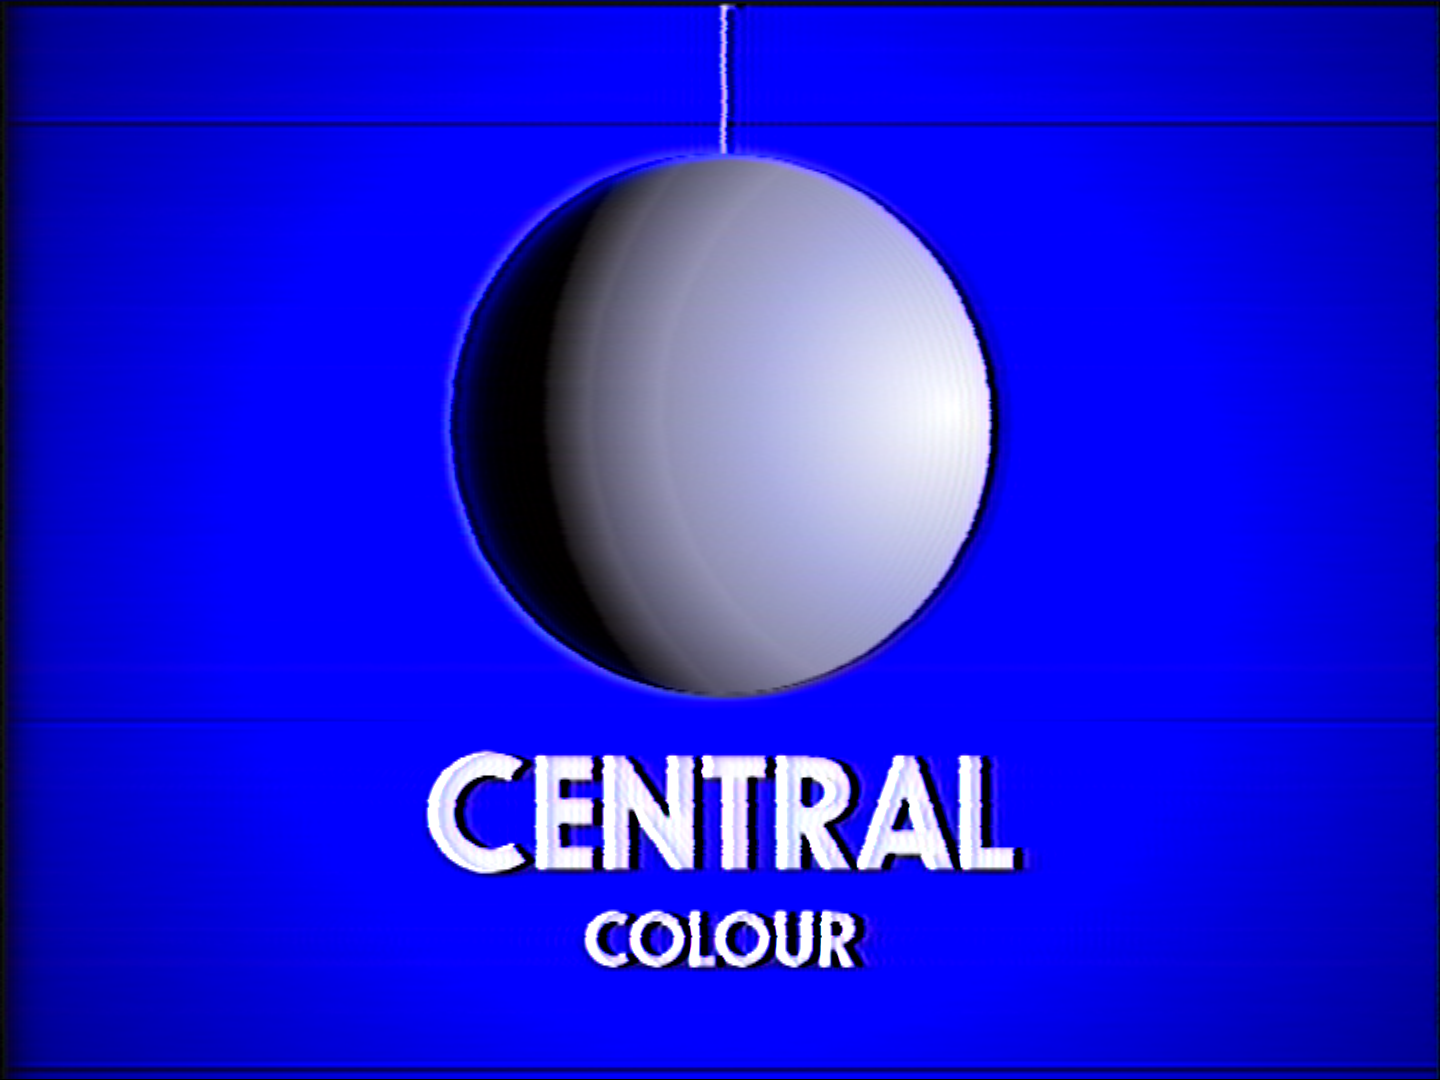 Central Television (1968)